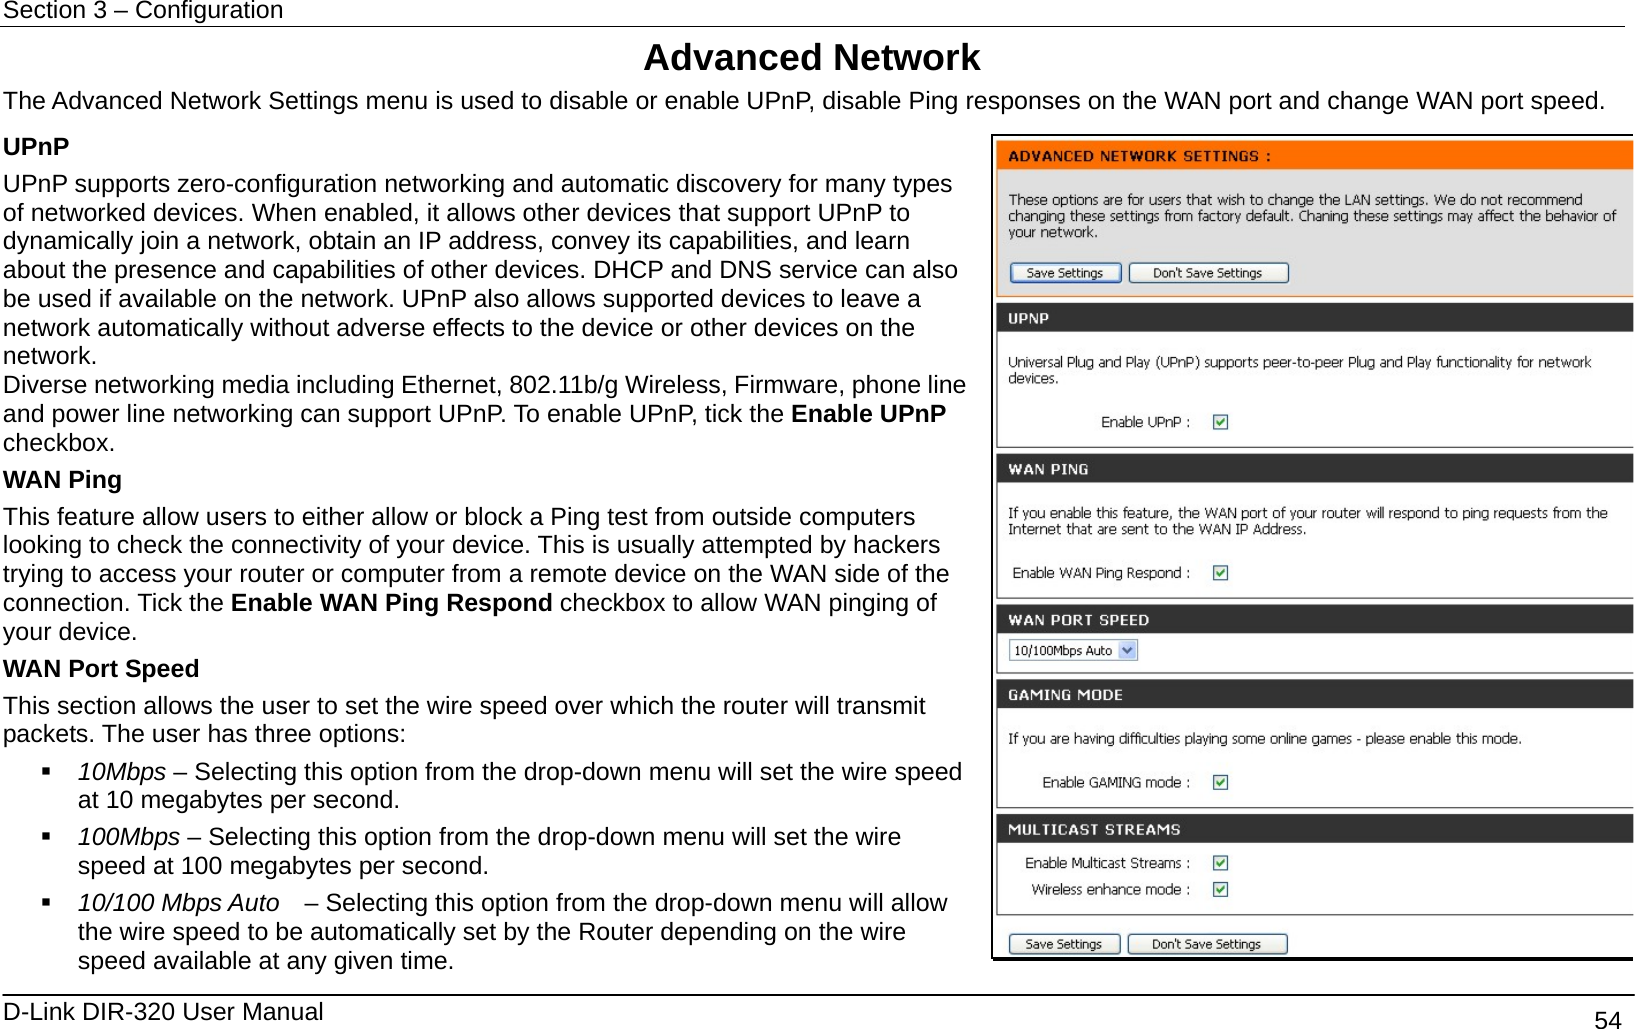 Section 3 – Configuration   D-Link DIR-320 User Manual                                       54 Advanced Network The Advanced Network Settings menu is used to disable or enable UPnP, disable Ping responses on the WAN port and change WAN port speed. UPnP UPnP supports zero-configuration networking and automatic discovery for many types of networked devices. When enabled, it allows other devices that support UPnP to dynamically join a network, obtain an IP address, convey its capabilities, and learn about the presence and capabilities of other devices. DHCP and DNS service can also be used if available on the network. UPnP also allows supported devices to leave a network automatically without adverse effects to the device or other devices on the network. Diverse networking media including Ethernet, 802.11b/g Wireless, Firmware, phone line and power line networking can support UPnP. To enable UPnP, tick the Enable UPnP checkbox. WAN Ping This feature allow users to either allow or block a Ping test from outside computers looking to check the connectivity of your device. This is usually attempted by hackers trying to access your router or computer from a remote device on the WAN side of the connection. Tick the Enable WAN Ping Respond checkbox to allow WAN pinging of your device. WAN Port Speed This section allows the user to set the wire speed over which the router will transmit packets. The user has three options:  10Mbps – Selecting this option from the drop-down menu will set the wire speed at 10 megabytes per second.  100Mbps – Selecting this option from the drop-down menu will set the wire speed at 100 megabytes per second.    10/100 Mbps Auto    – Selecting this option from the drop-down menu will allow the wire speed to be automatically set by the Router depending on the wire speed available at any given time. 